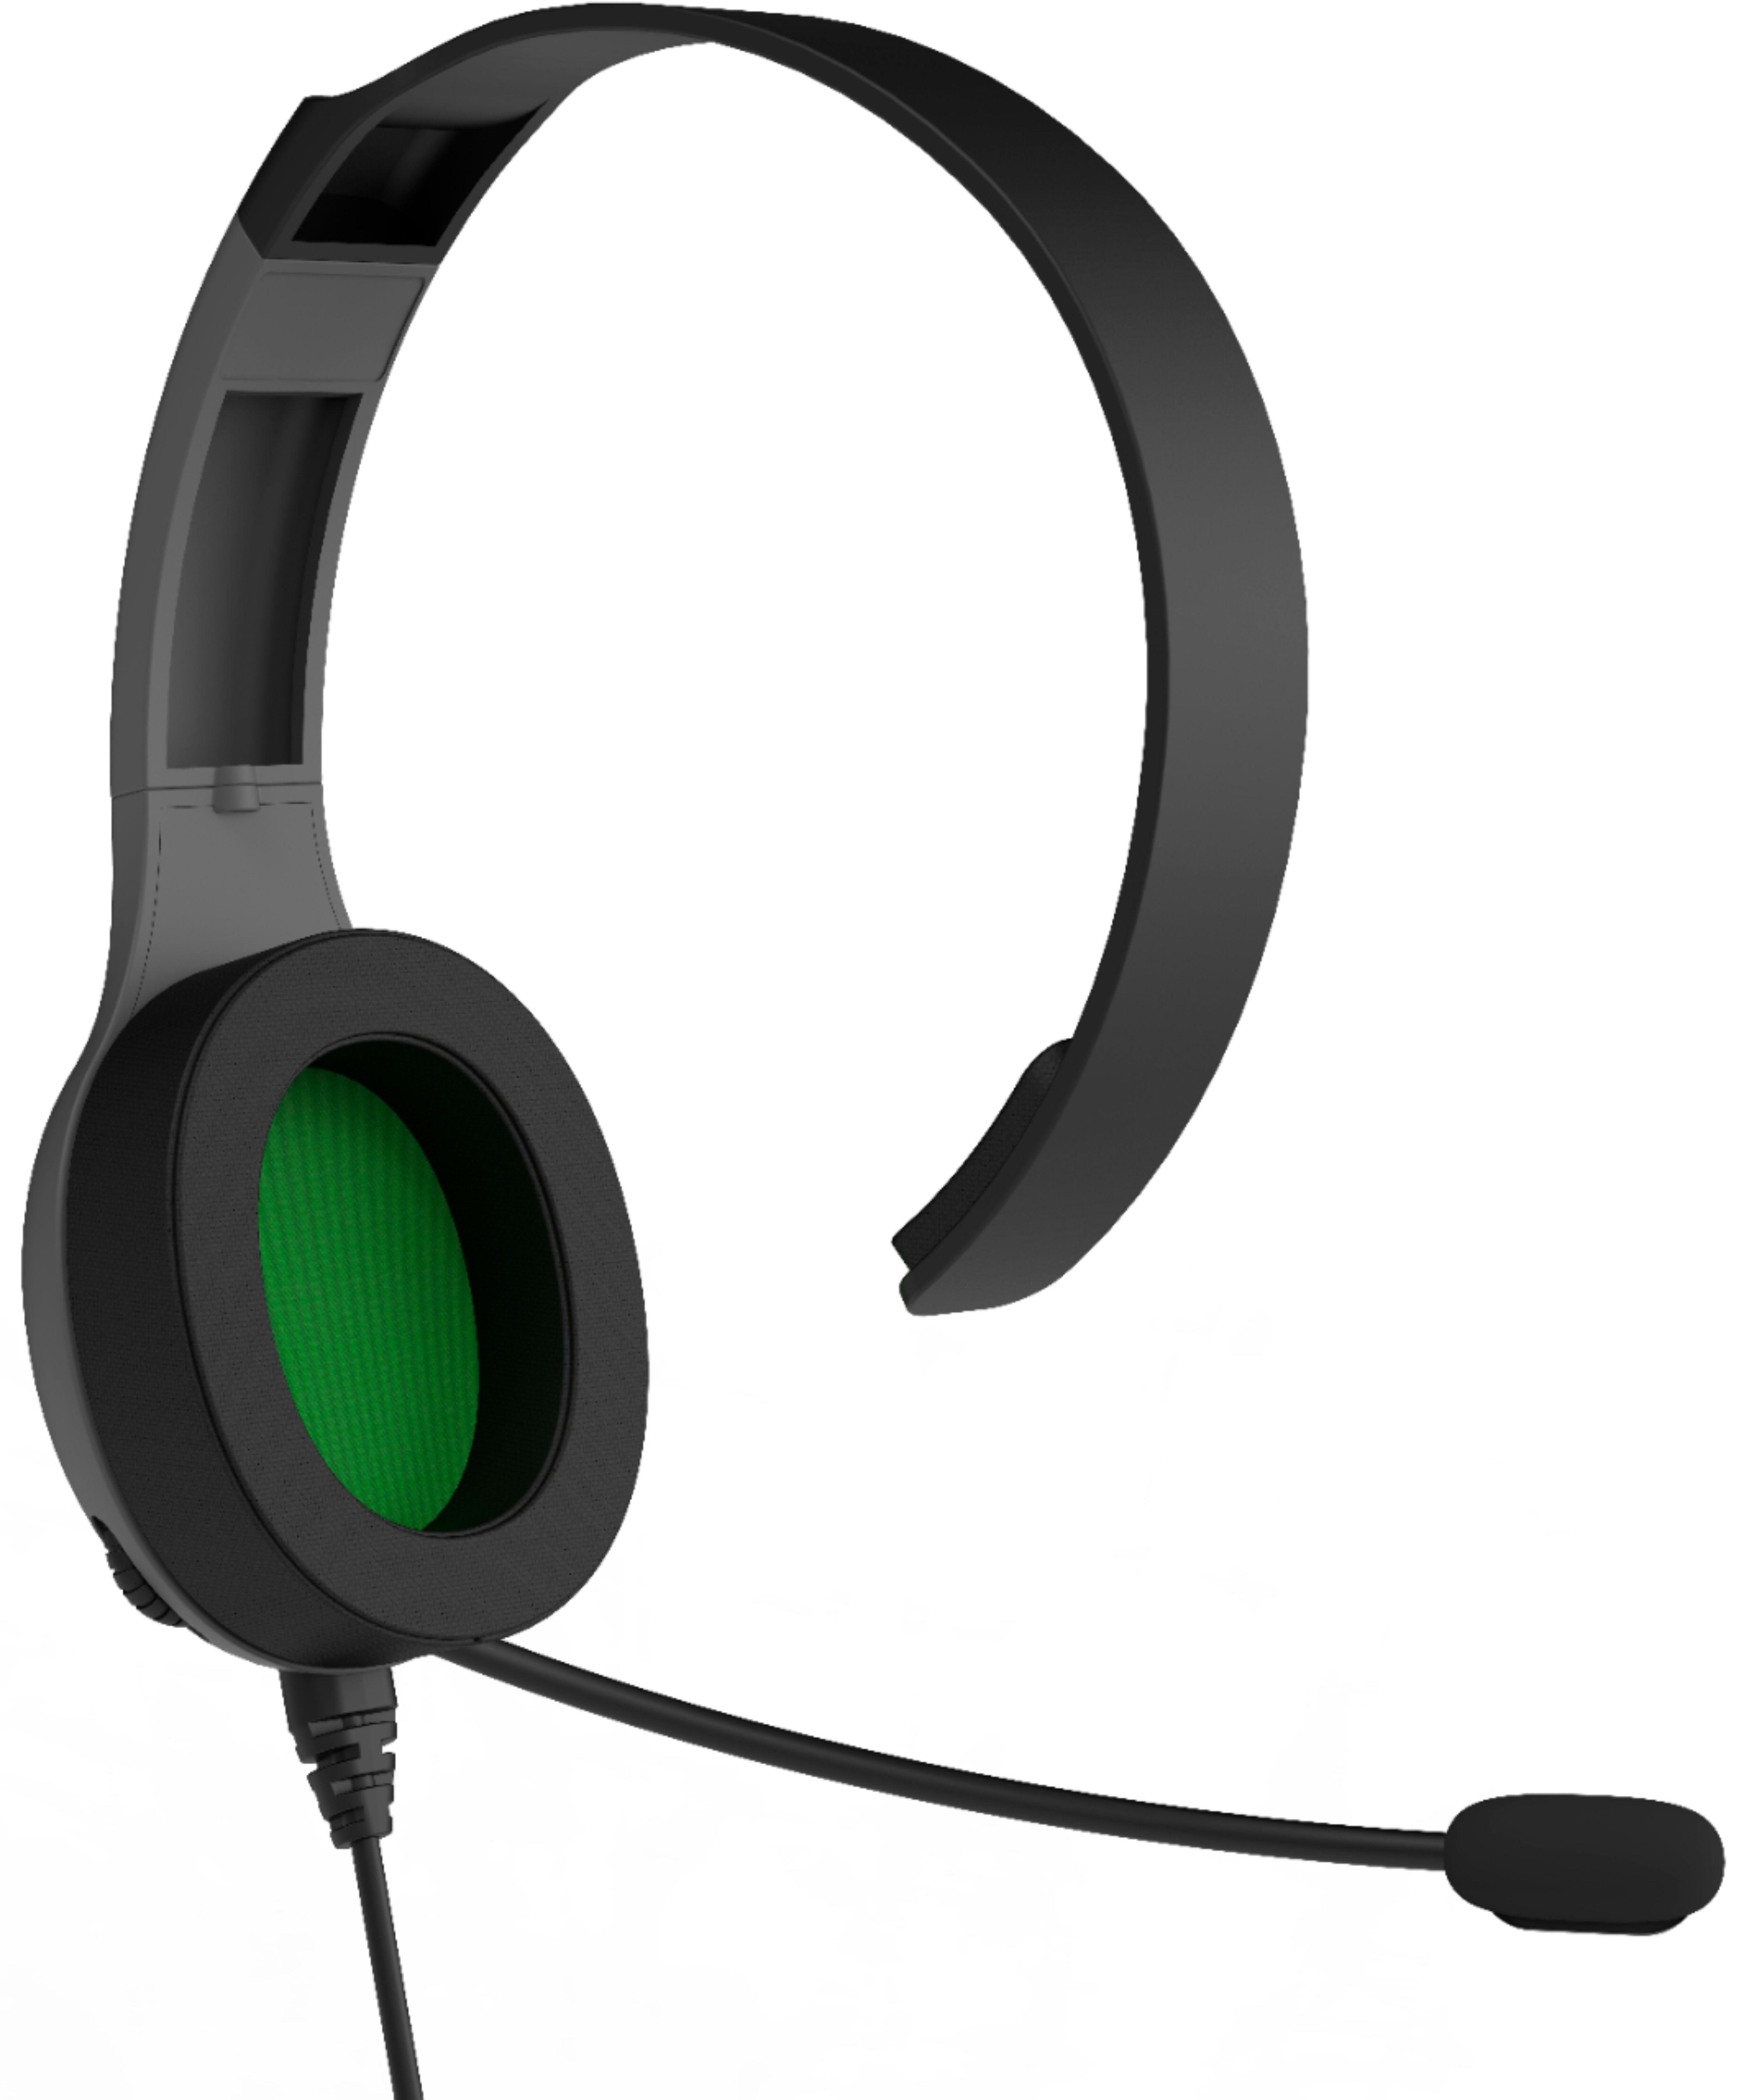  PDP LVL30 Wired Headset with Single-Sided One Ear